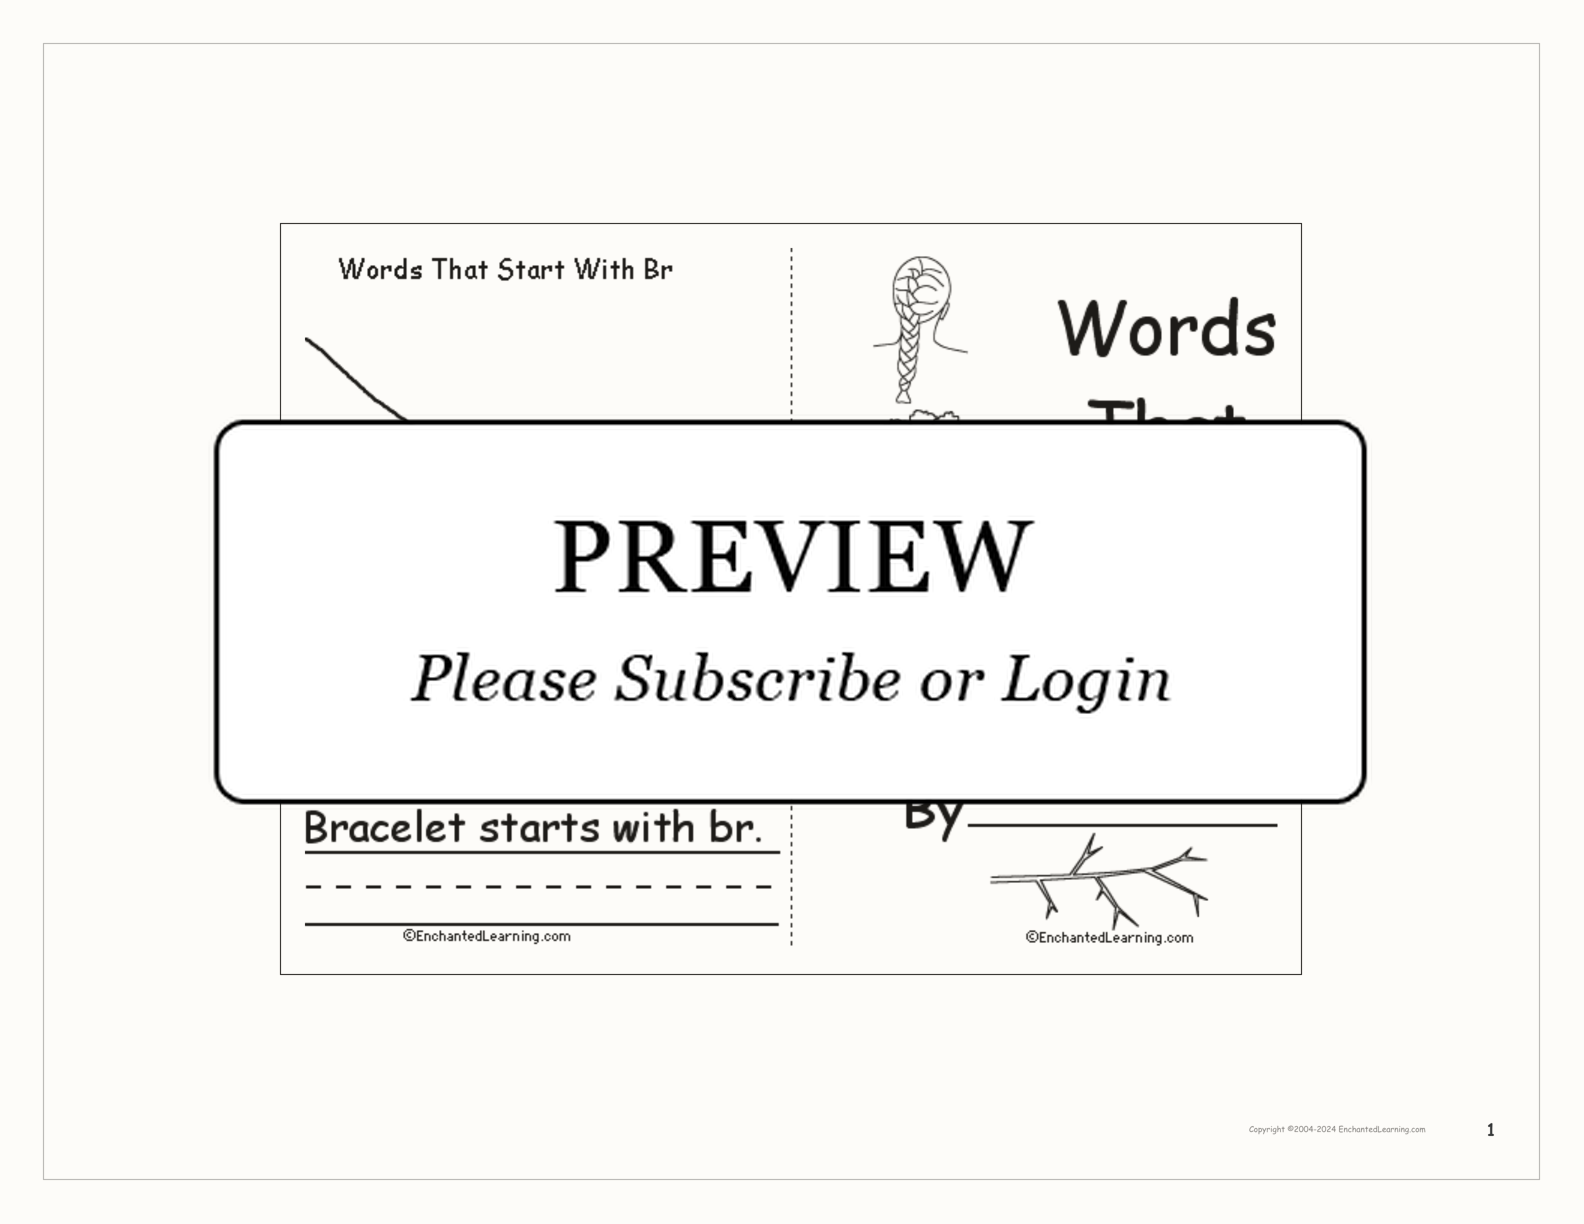 Words That Start With 'Br' Book interactive printout page 1